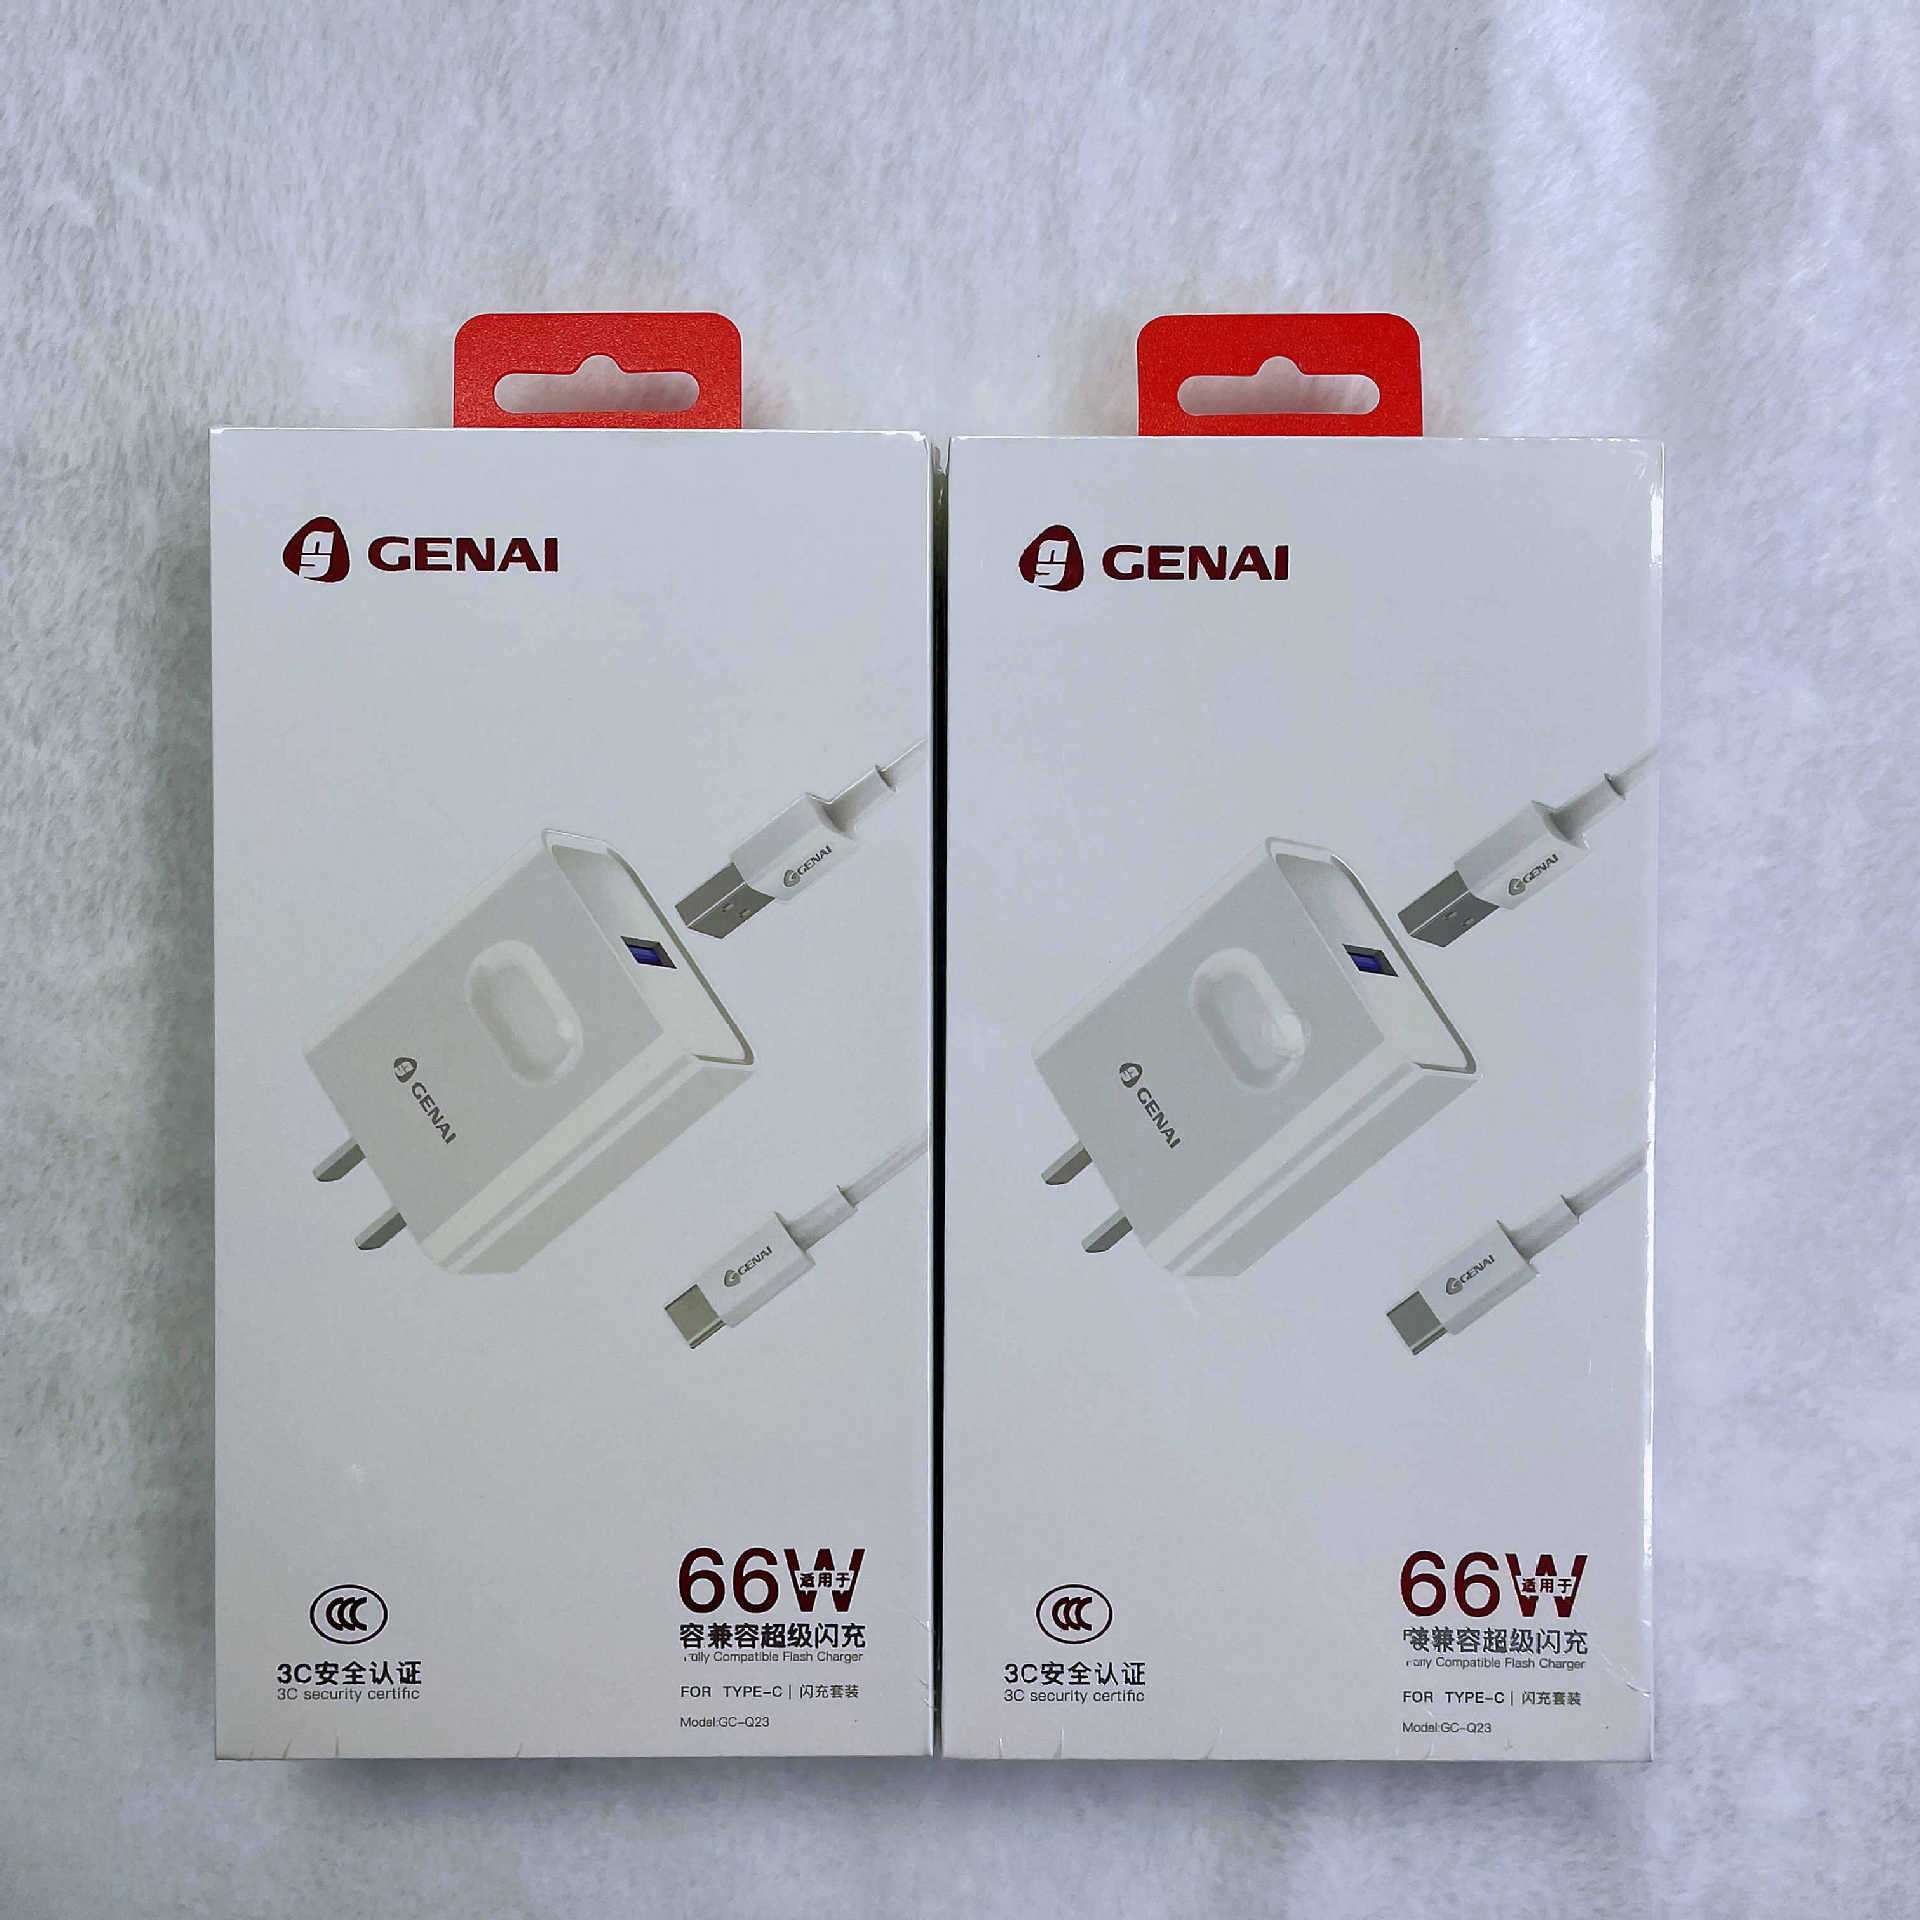 Genai 3c Charger Set for Apple Huawei 66W Super Fast Charge Mobile Phone Accessories Data Cable Charging Plug